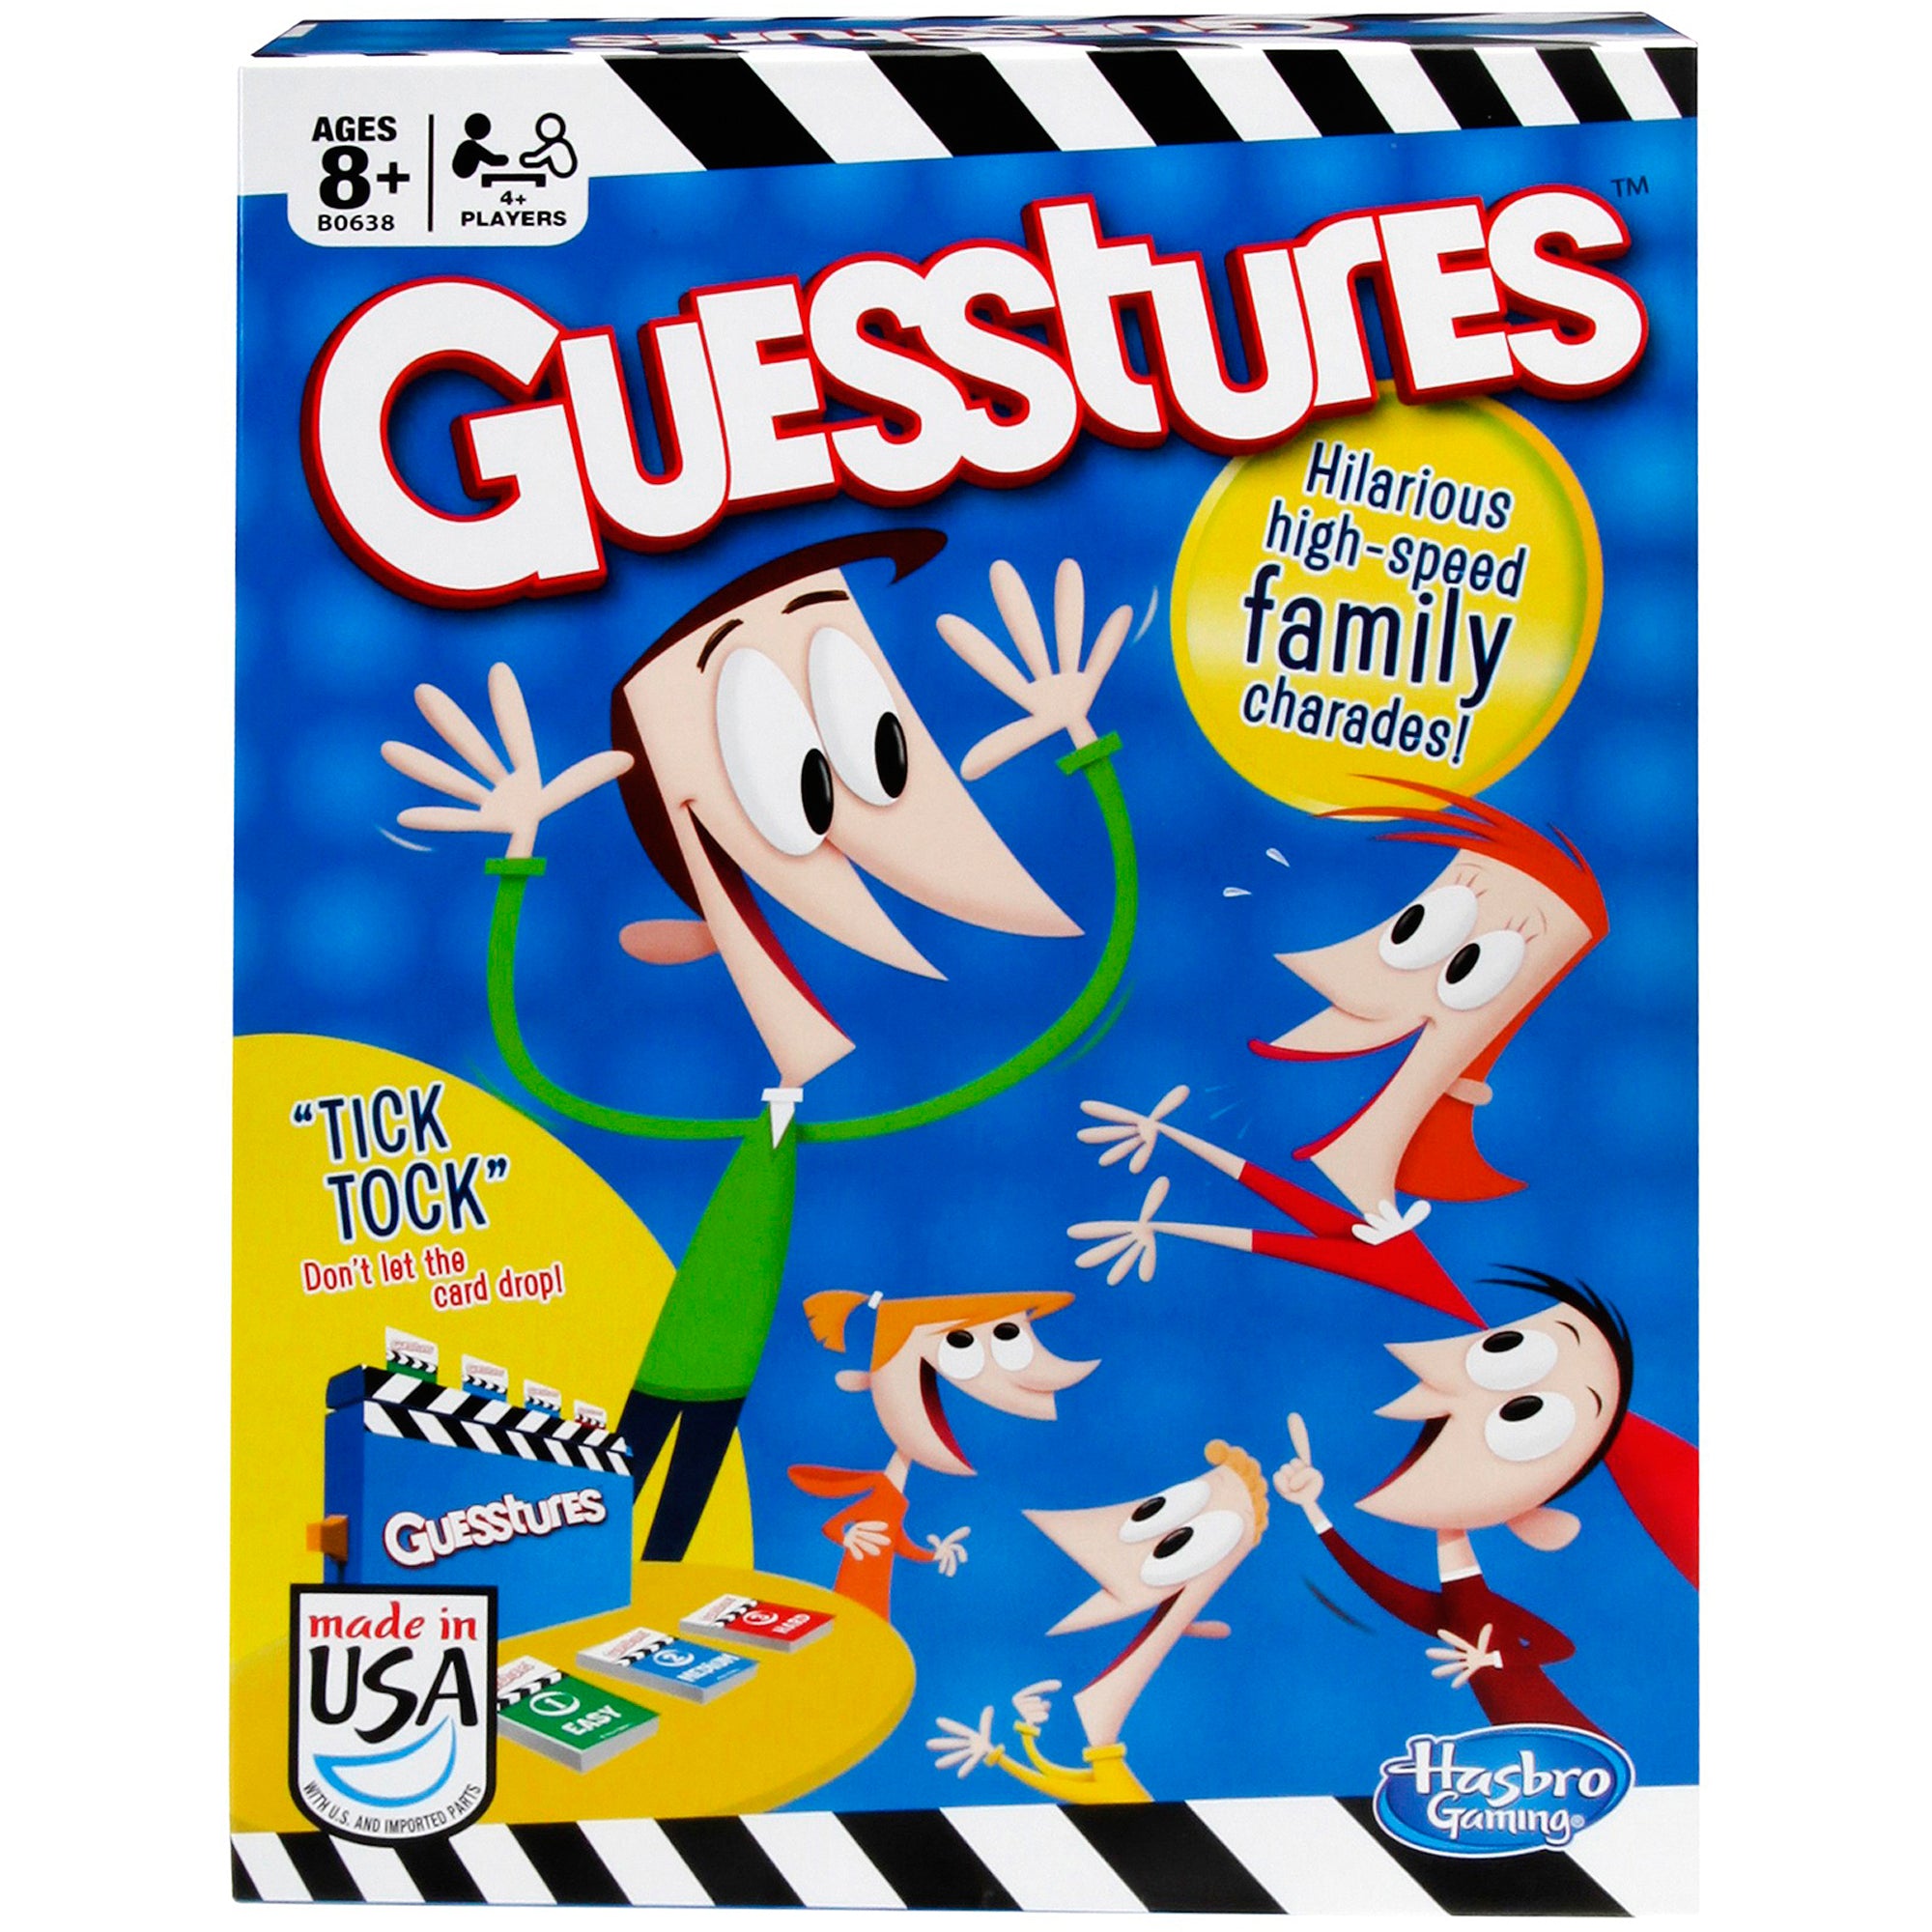 Guesstures